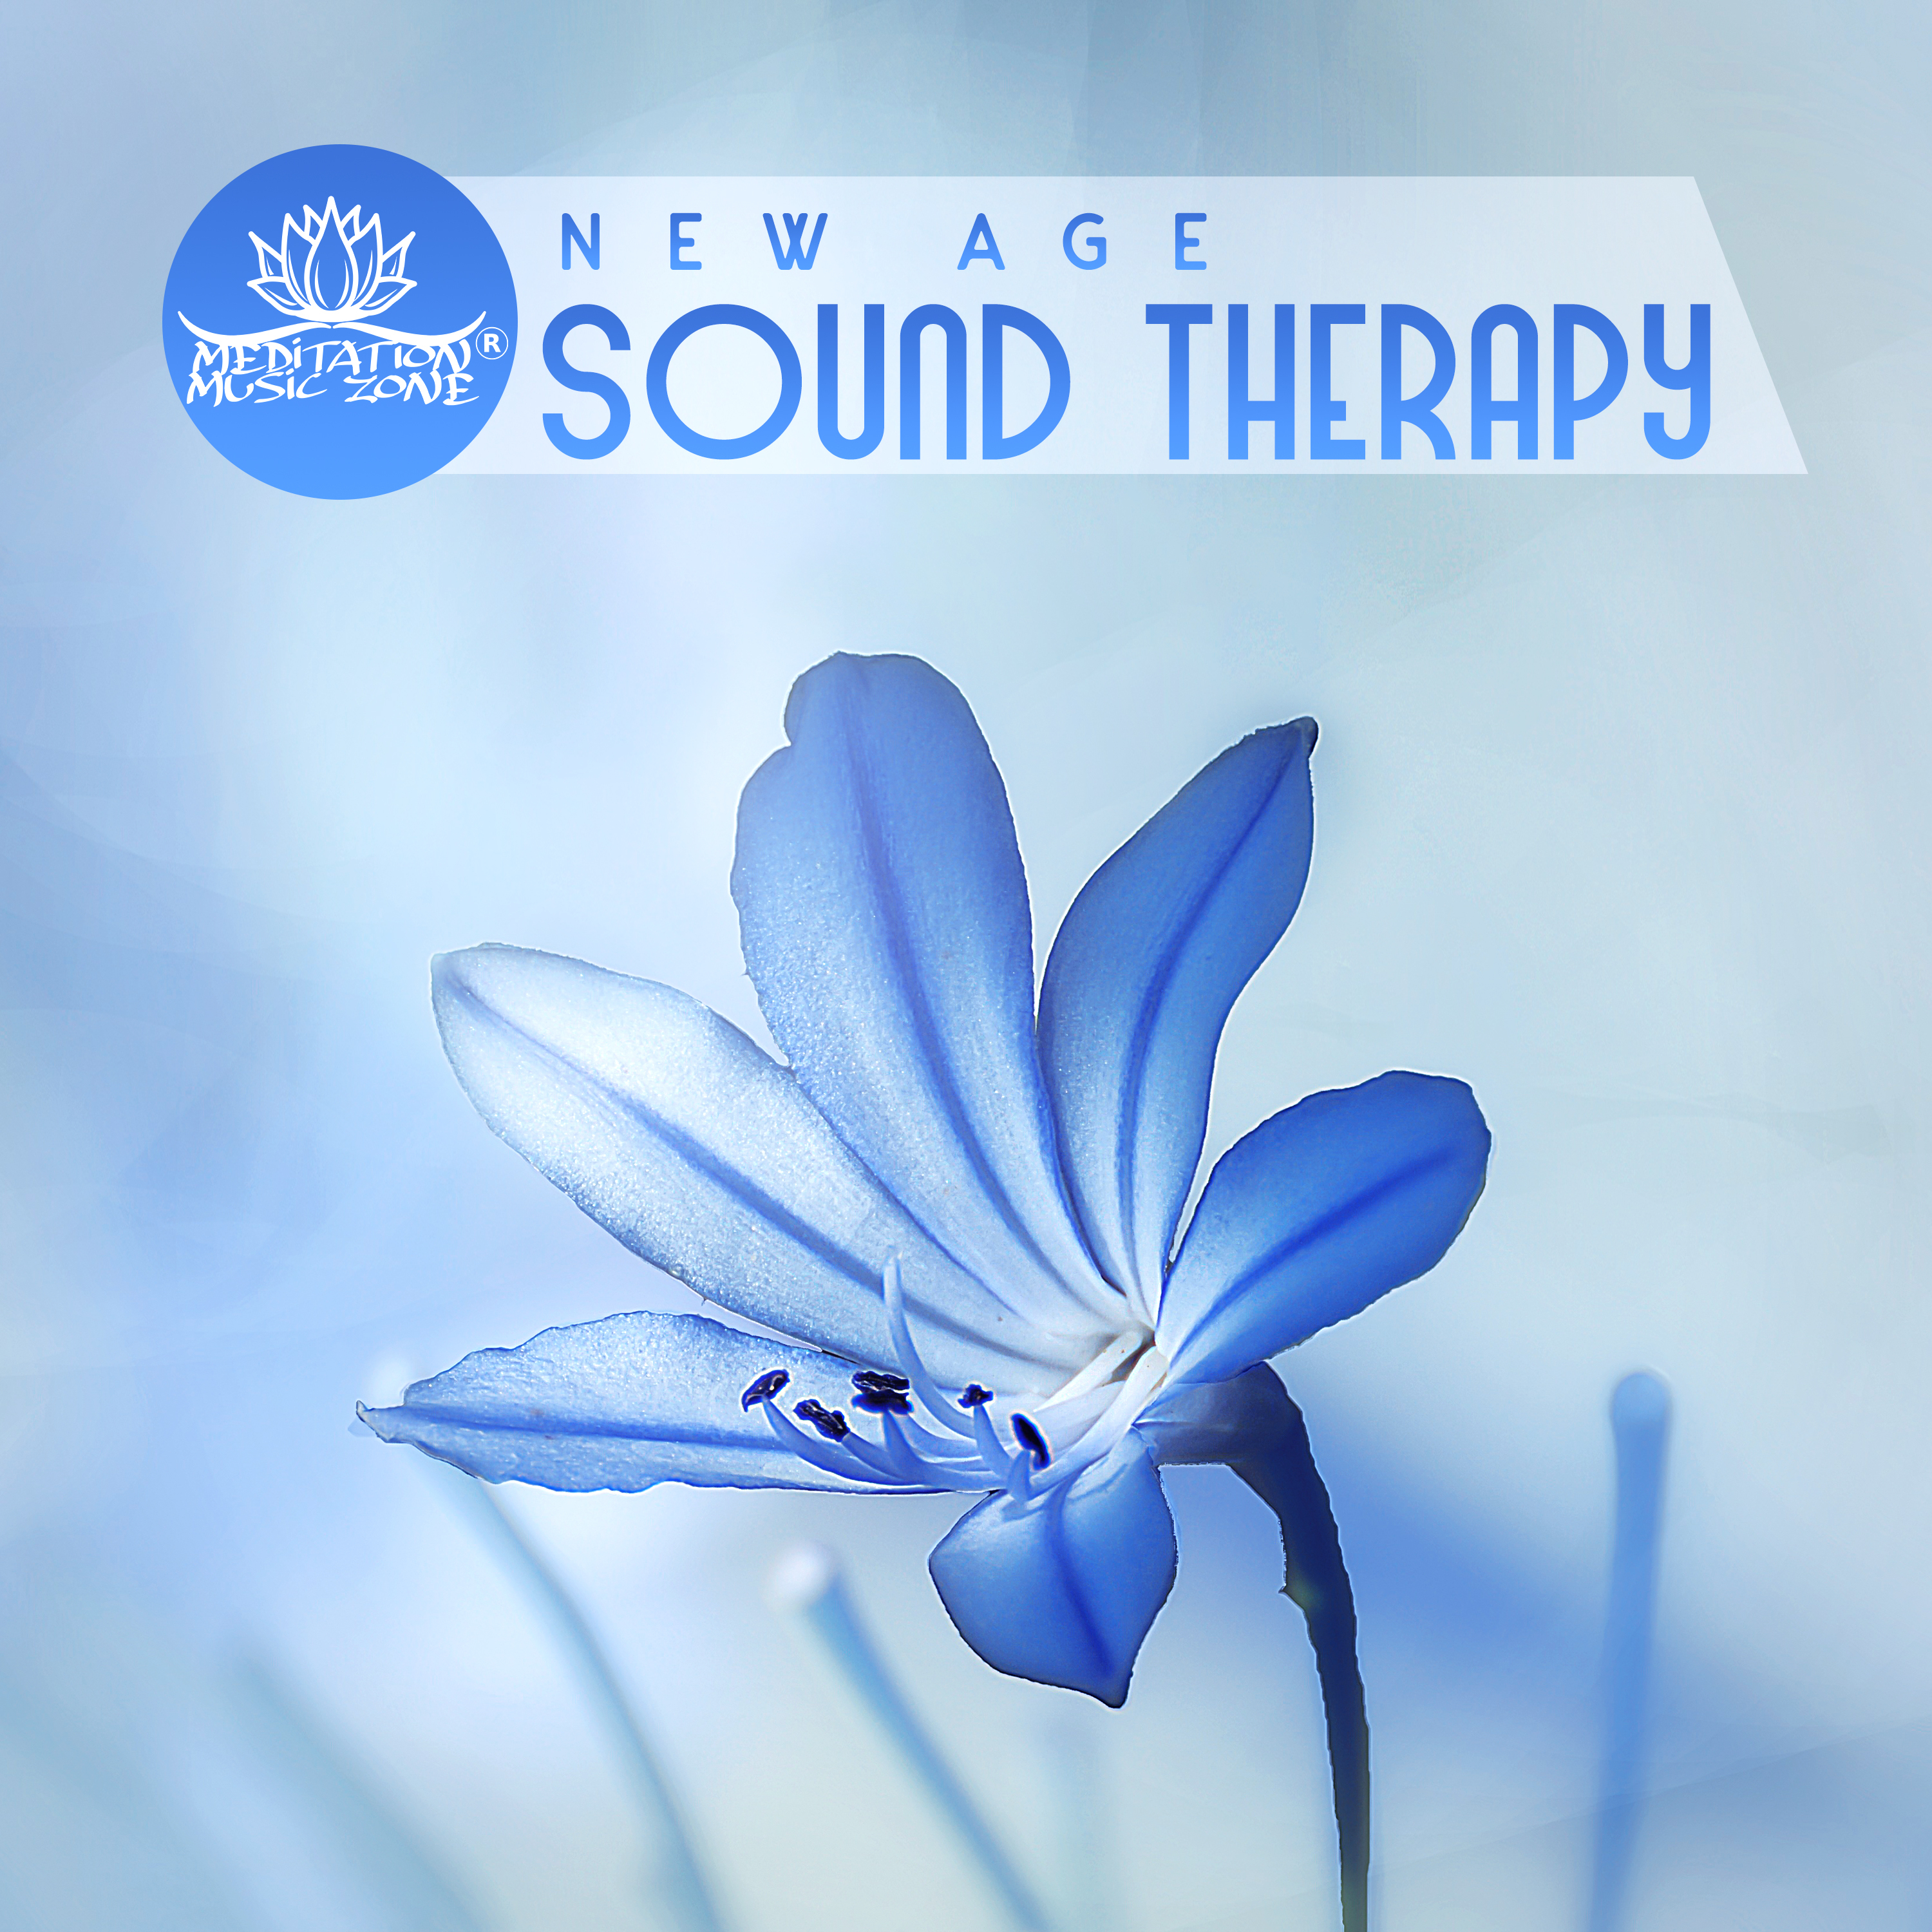 New Age Sound Therapy